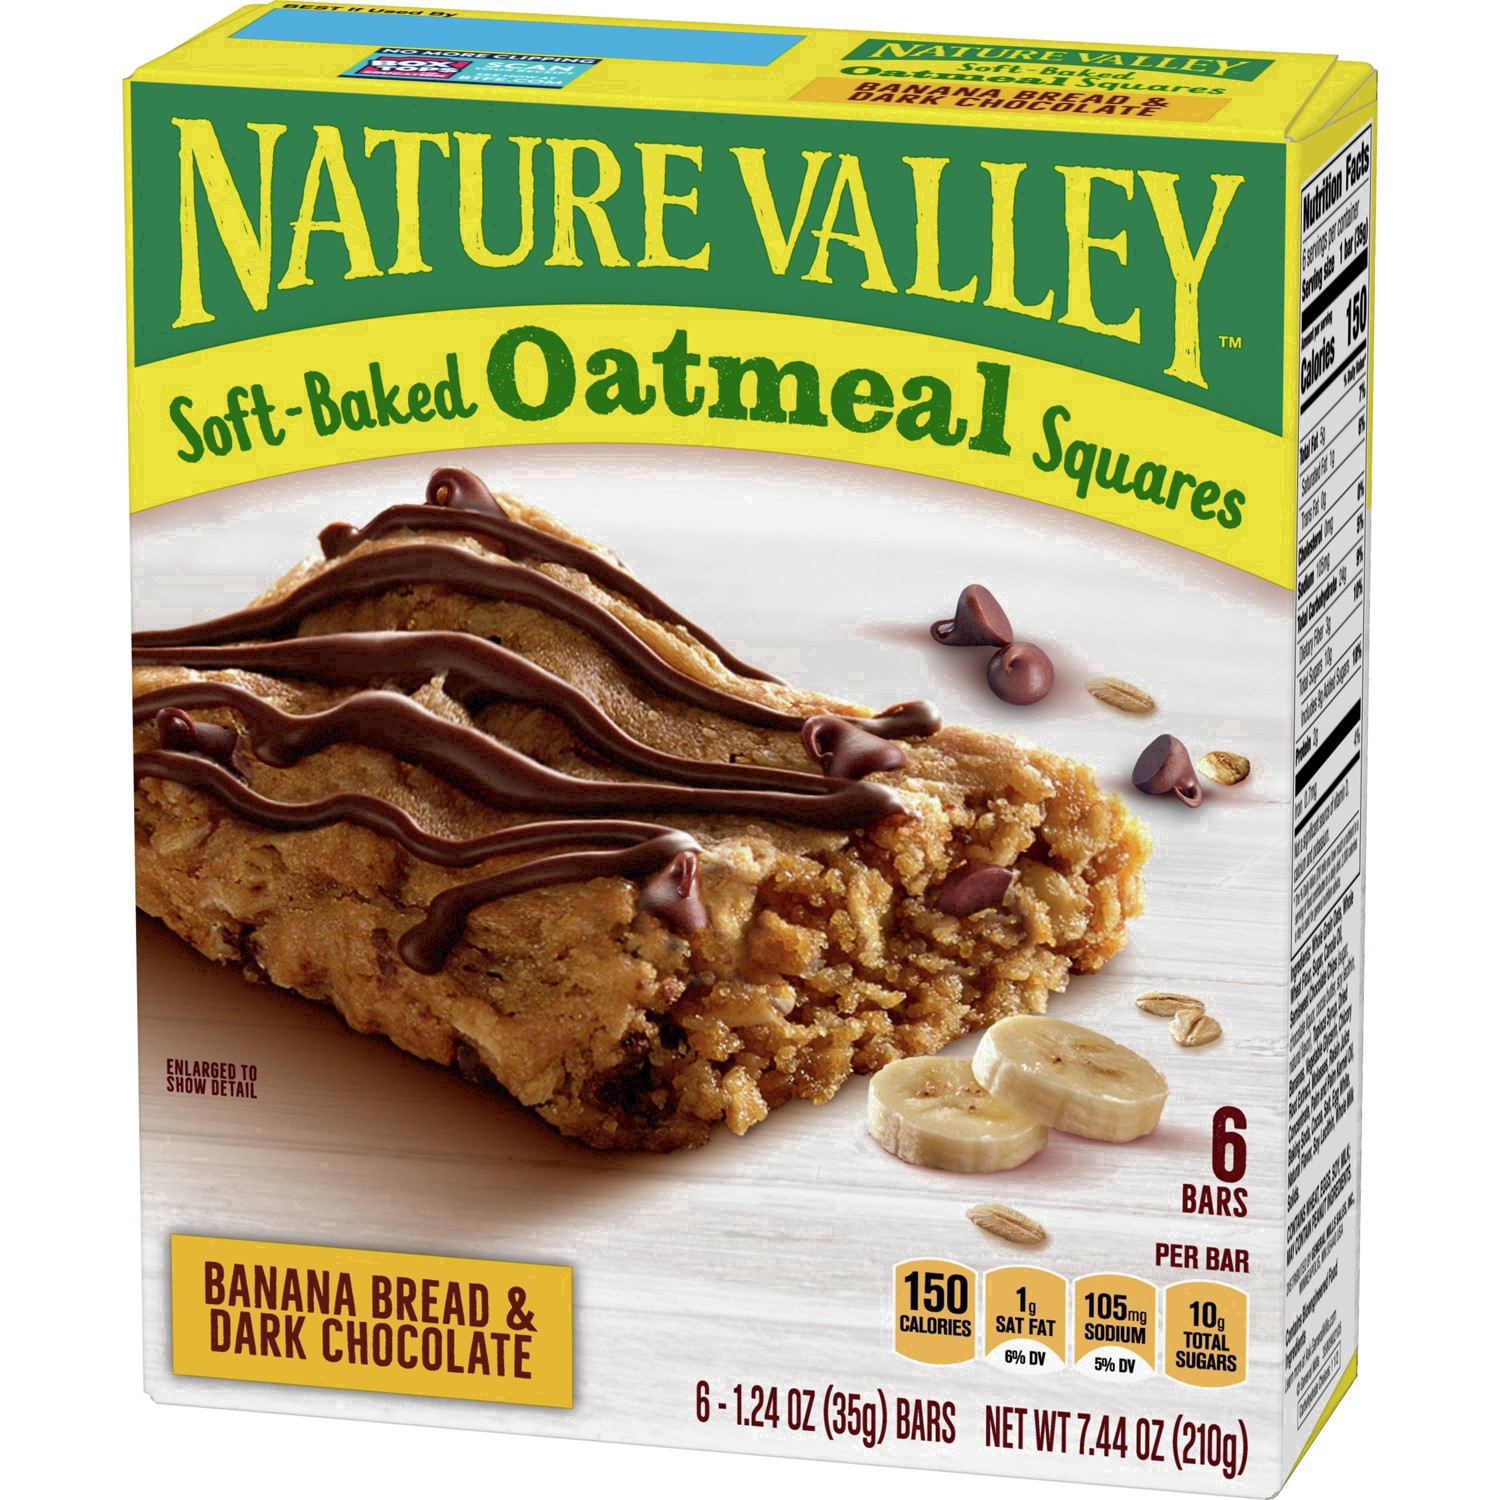 slide 6 of 101, Nature Valley Soft-Baked Oatmeal Squares, Banana Bread & Dark Chocolate, 6 ct, 6 ct